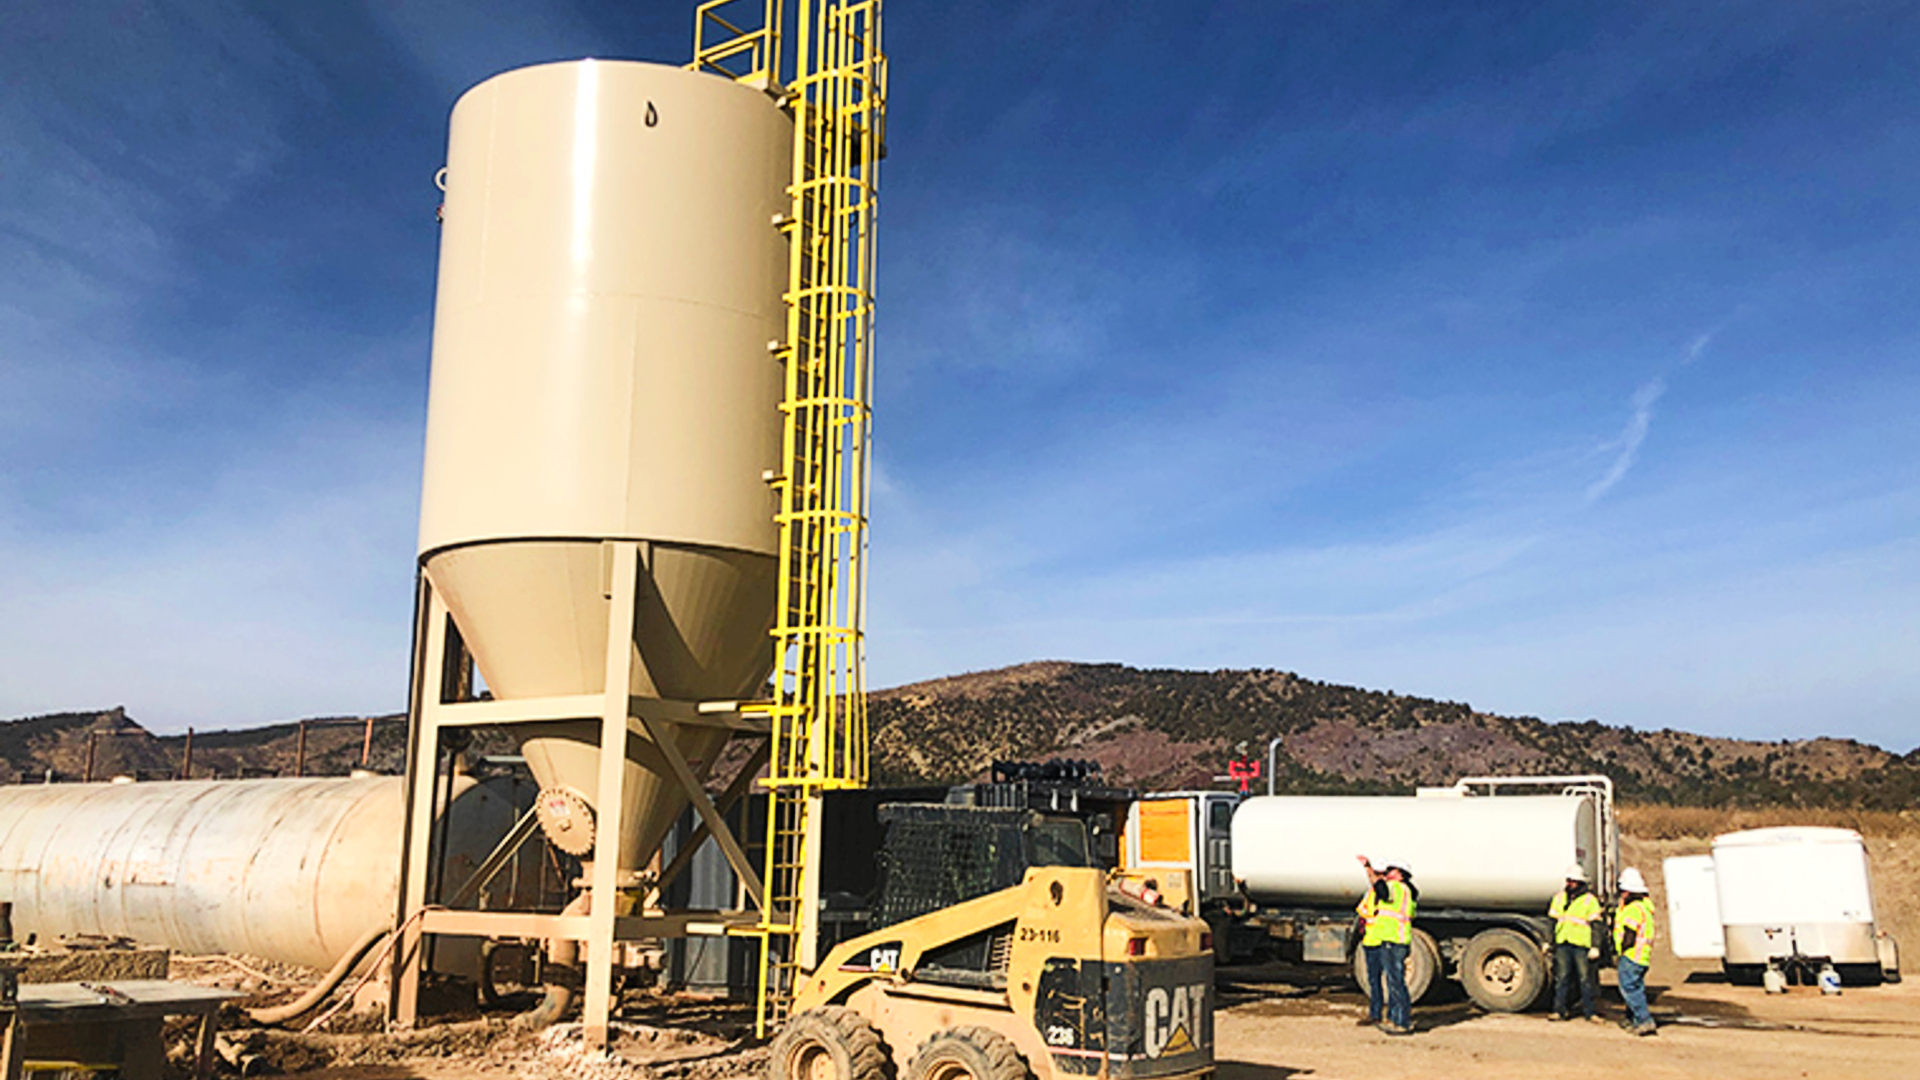 A vertical thickener being installed at a sand site with men standing around.